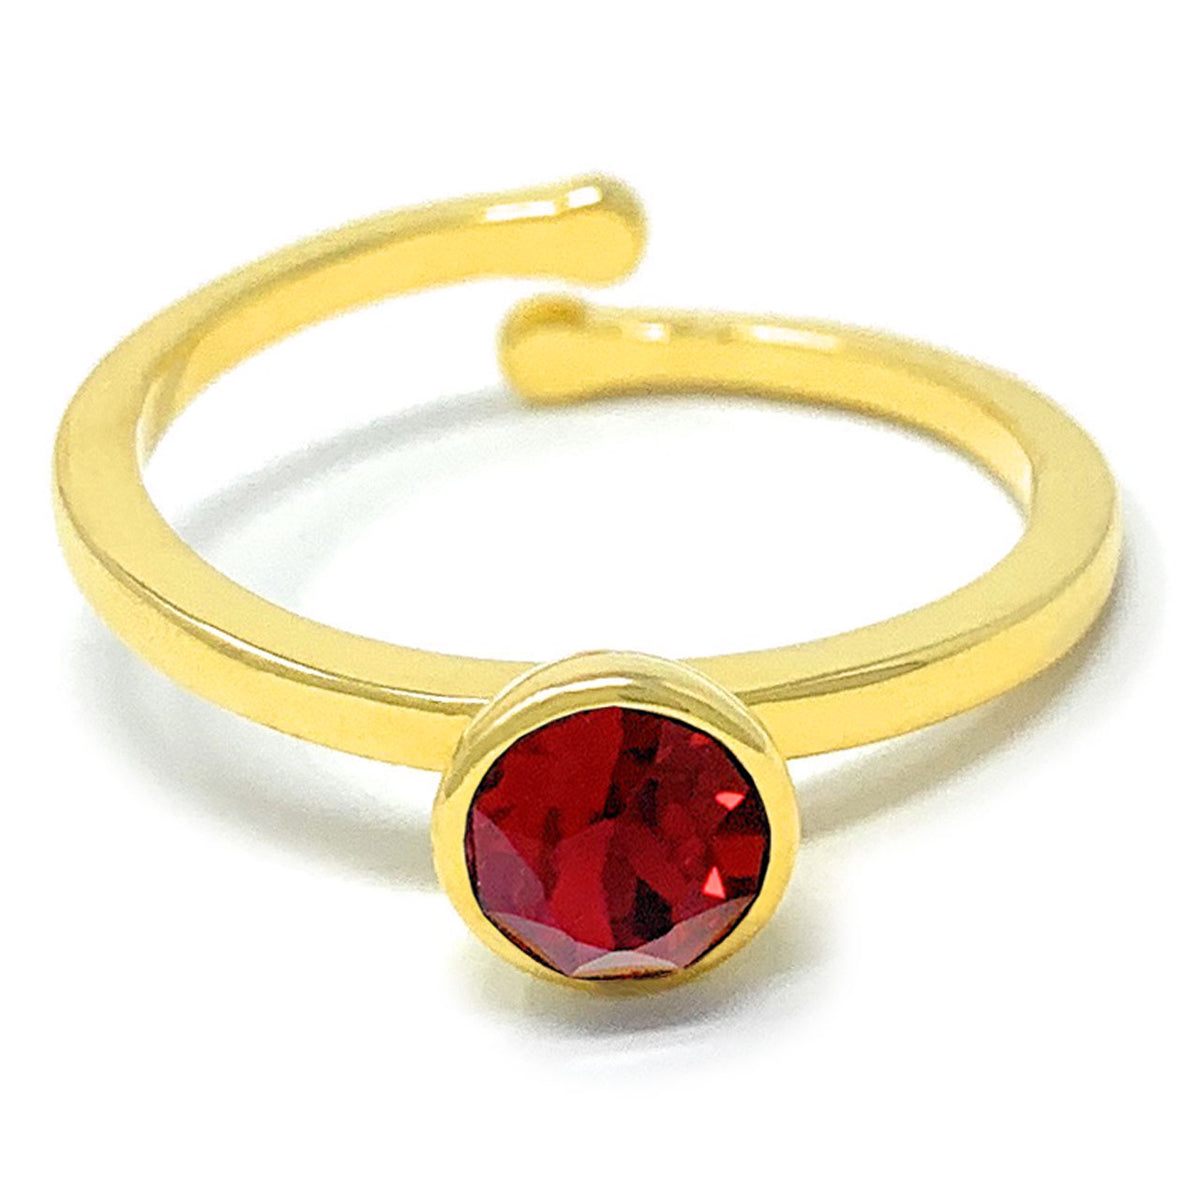 Harley Adjustable Ring with Red Siam Round Crystals from Swarovski Gold Plated - Ed Heart